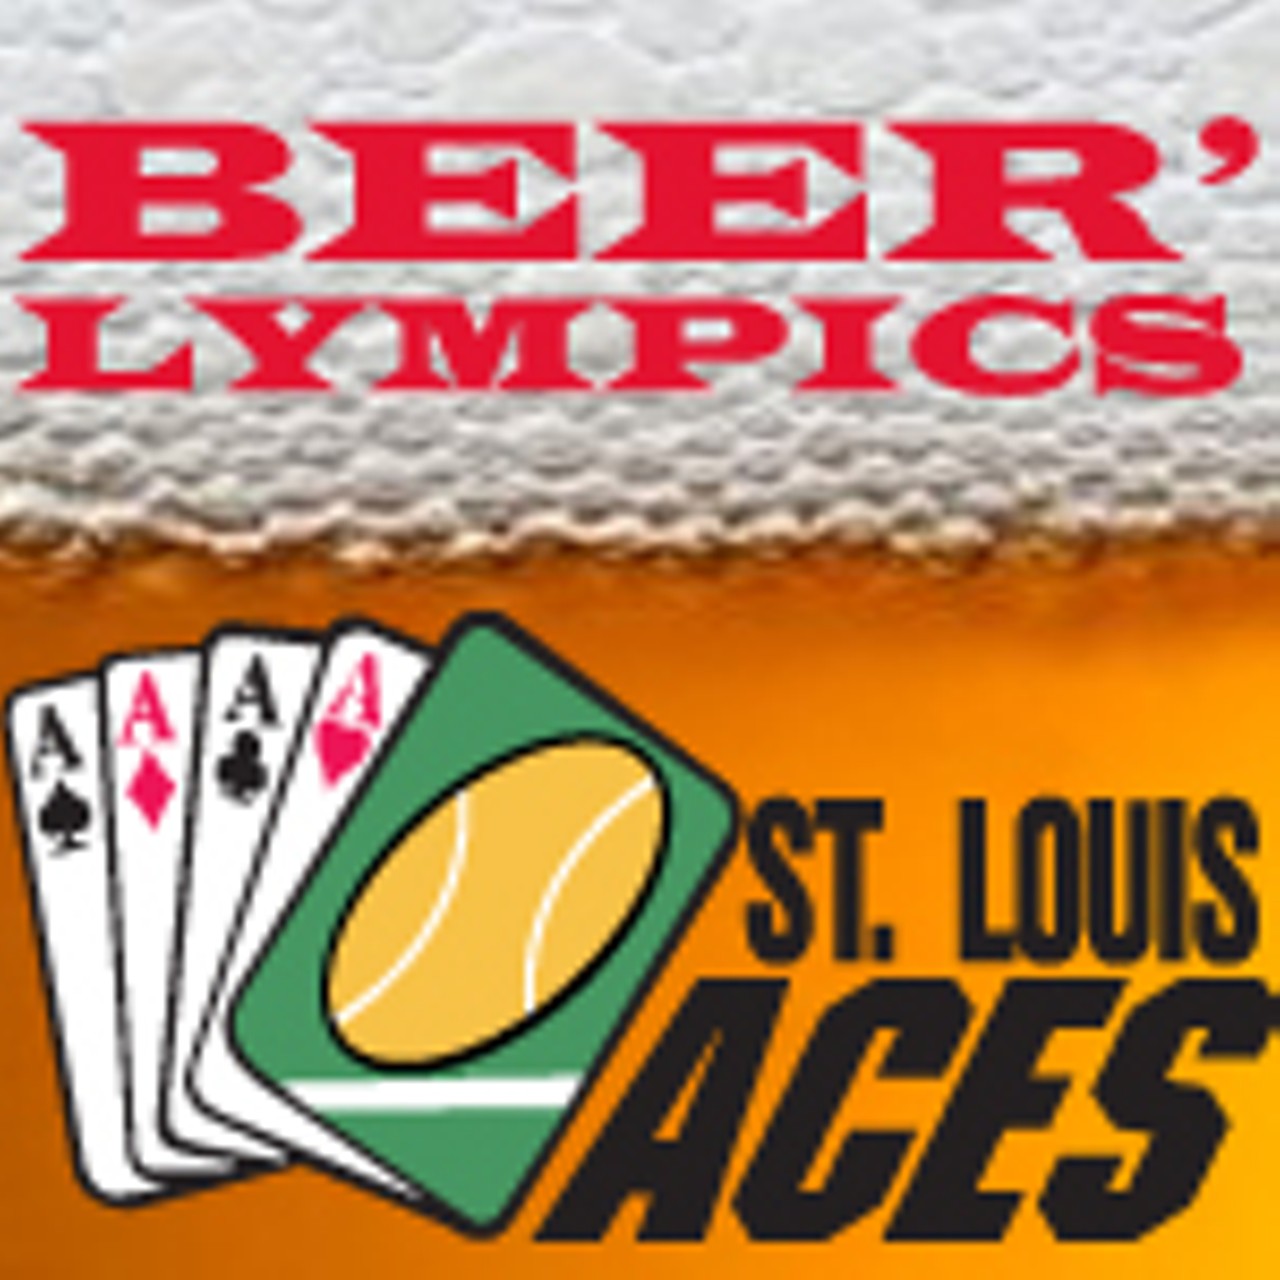 St. Louis Aces Opening Night